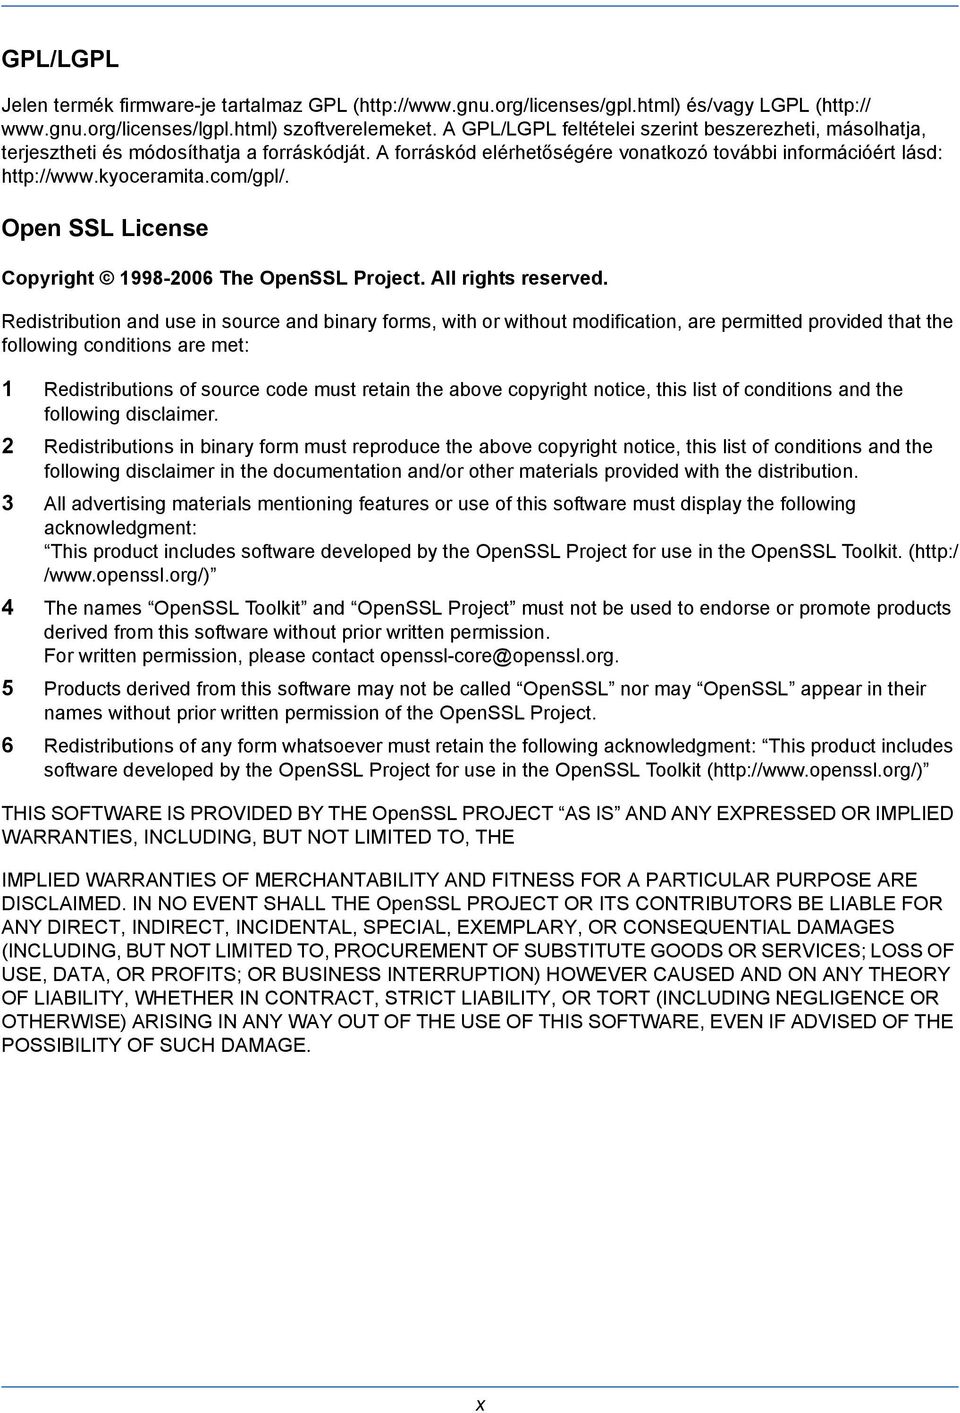 Open SSL License Copyright 1998-2006 The OpenSSL Project. All rights reserved.